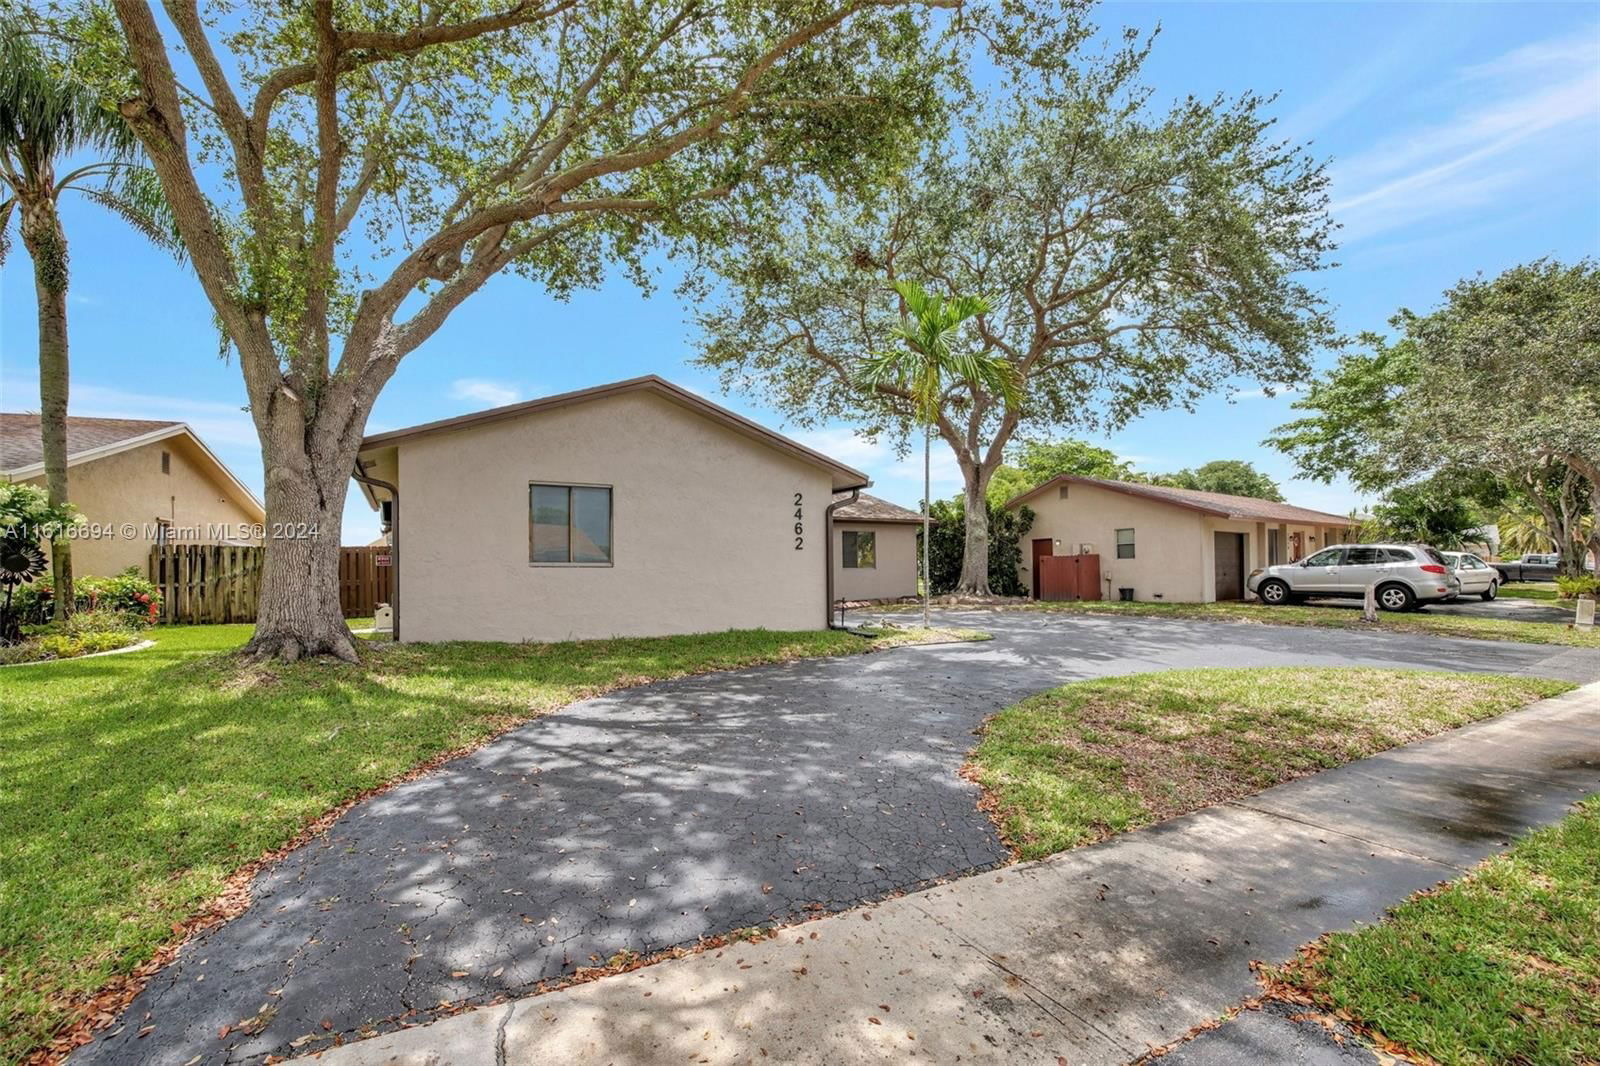 Real estate property located at 2462 108th Ter, Broward County, WOODSTOCK ADDITION NUMBER, Sunrise, FL